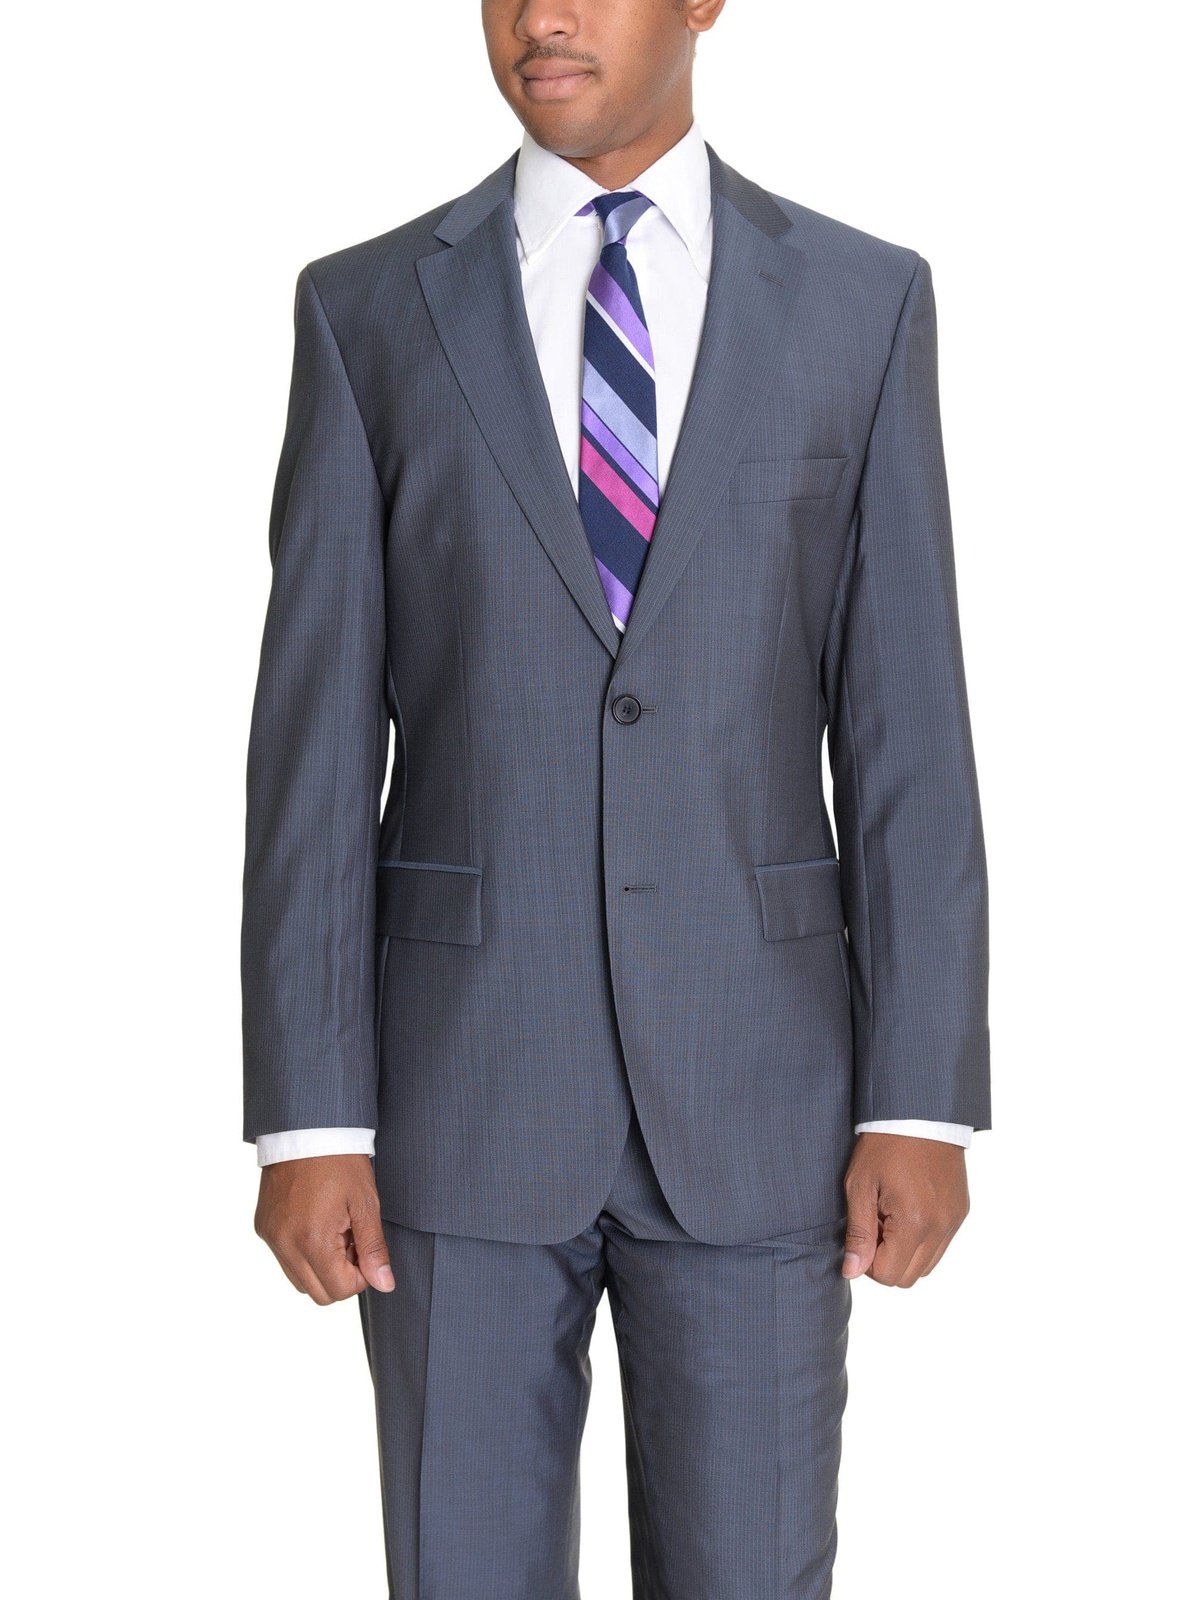 HUGO BOSS TWO PIECE SUITS Hugo Boss Paolini1/Movio1 Blue Gray Striped Two Button Wool Suit